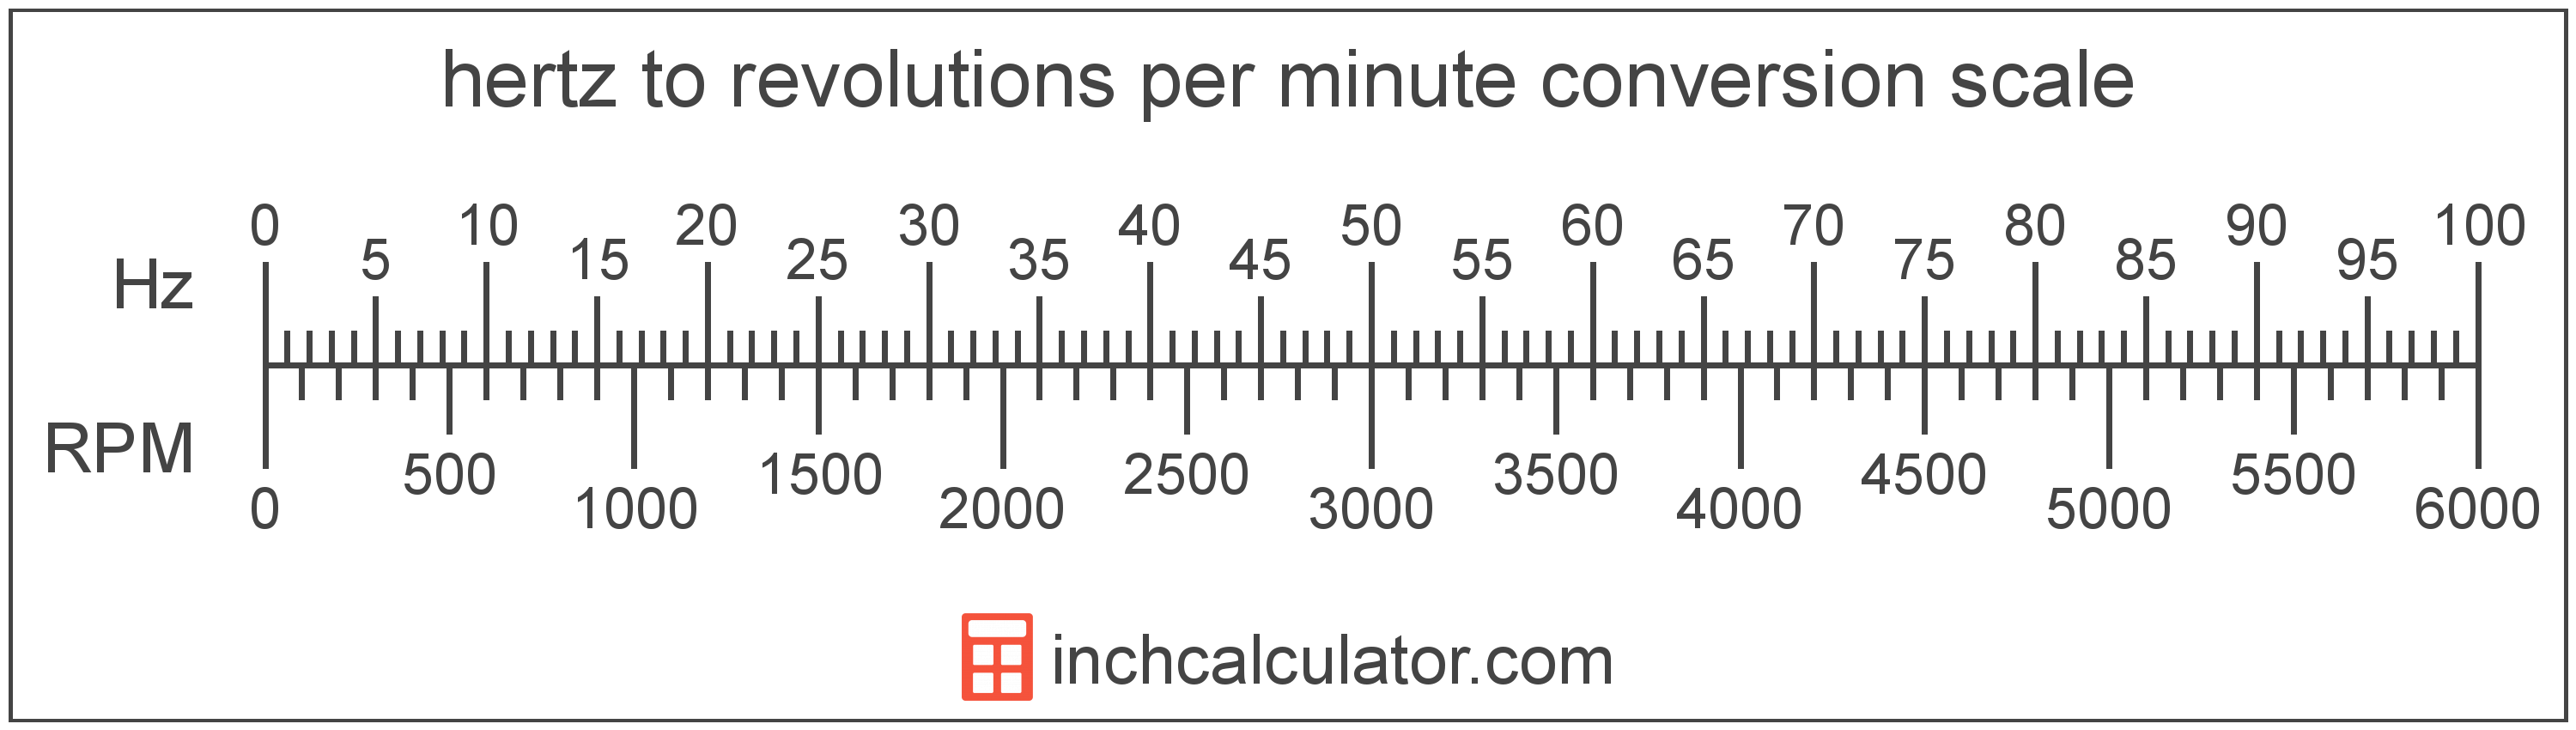 conversion scale showing revolutions per minute and equivalent hertz frequency values